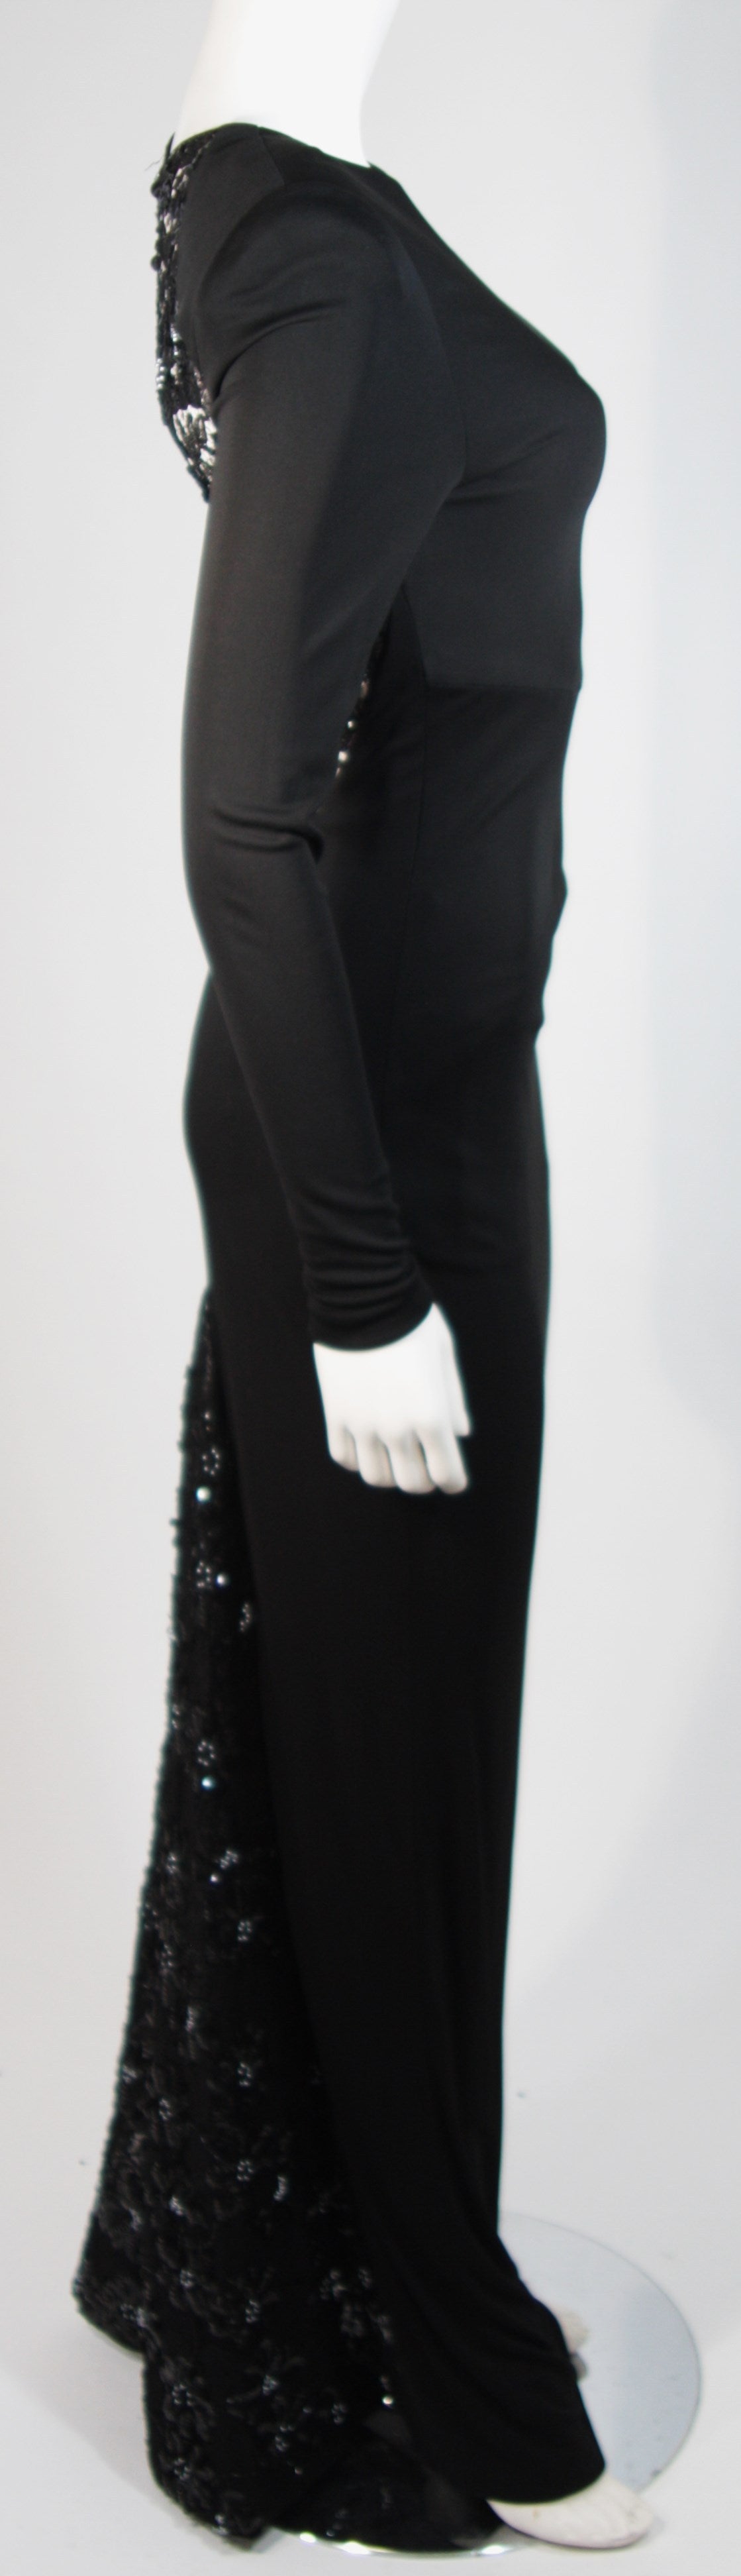 Vicky Tiel Black Jersey Gown with Sequin Lace Accents Size Small 1